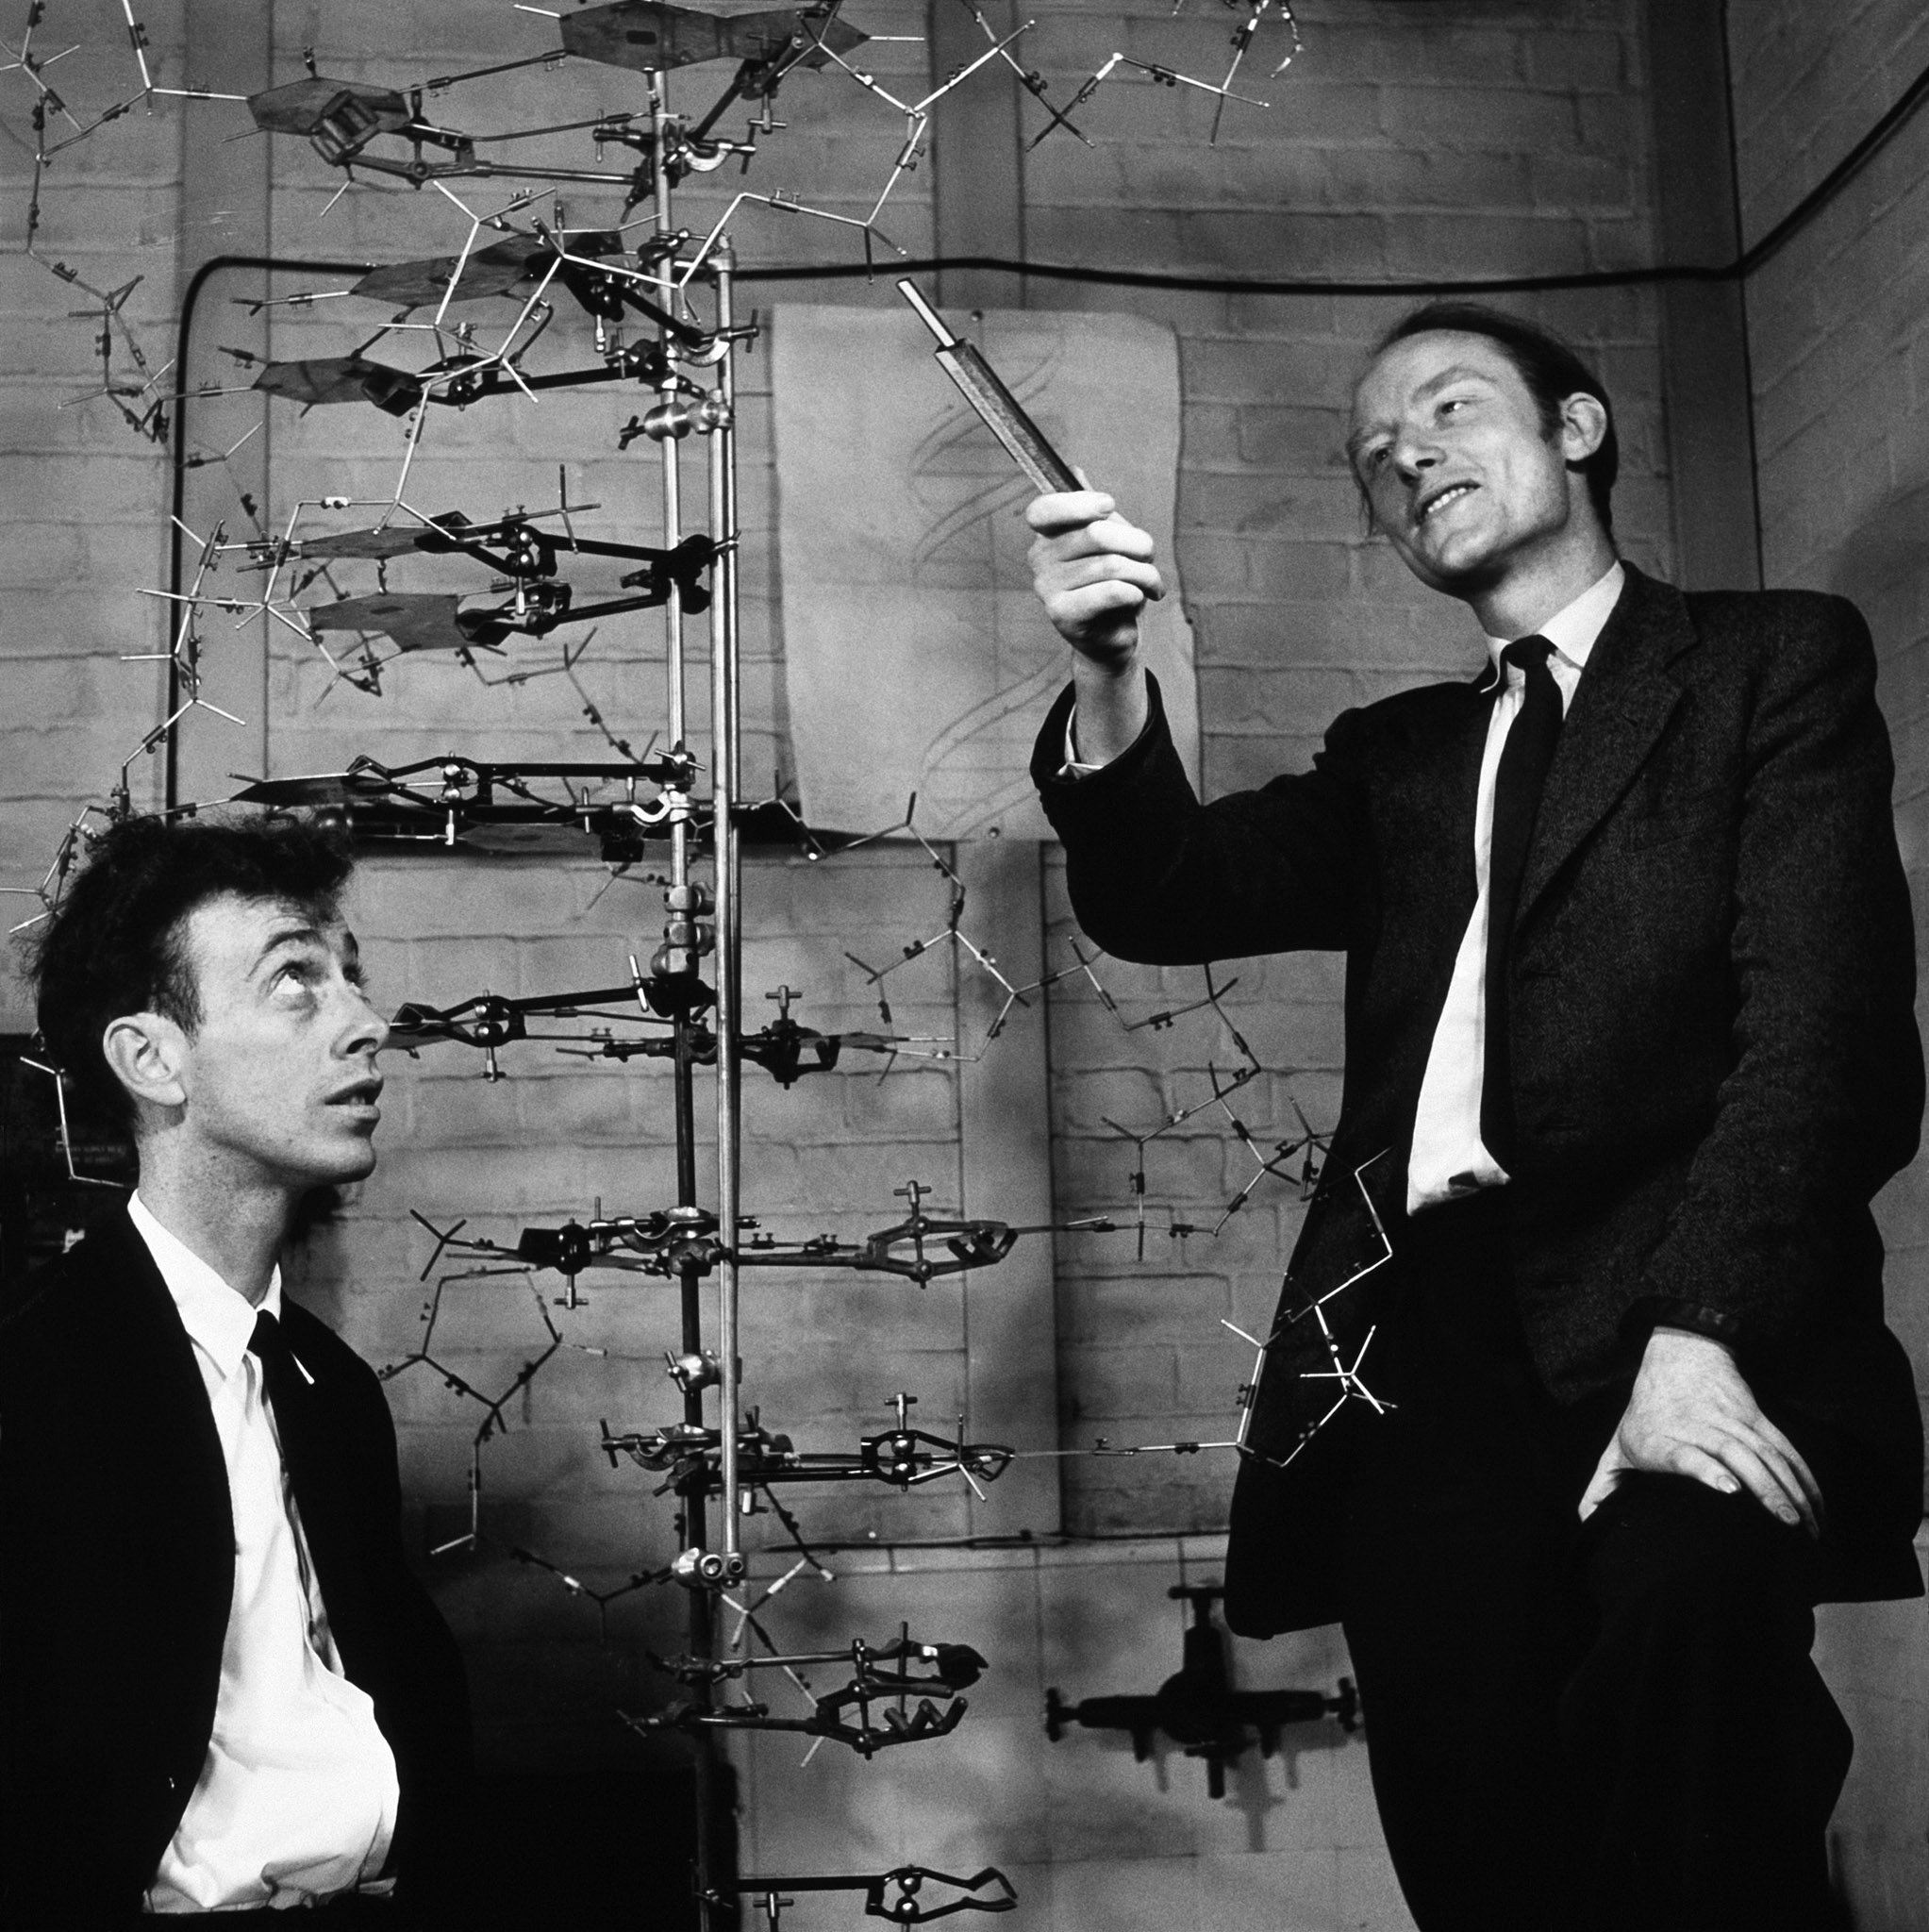 Crick and Watson with their DNA model